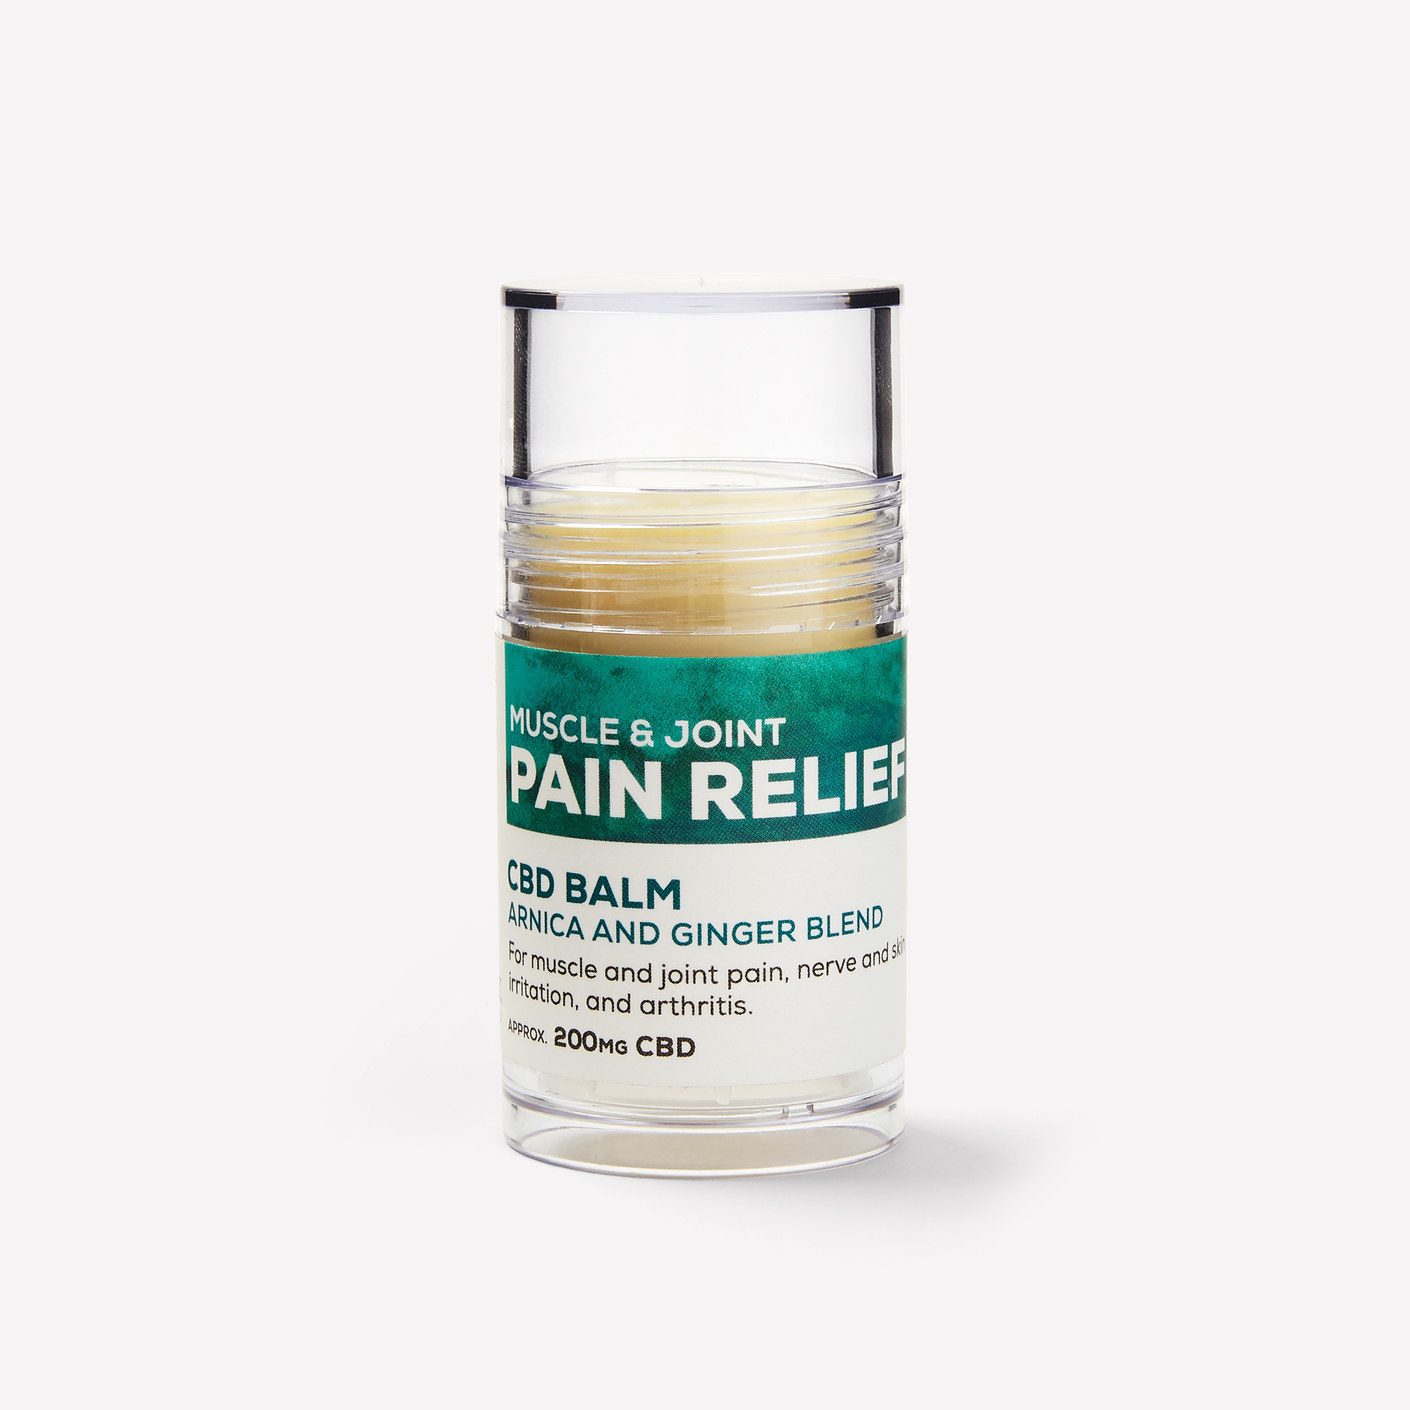 The on-the-go CBD muscle pain relief stick